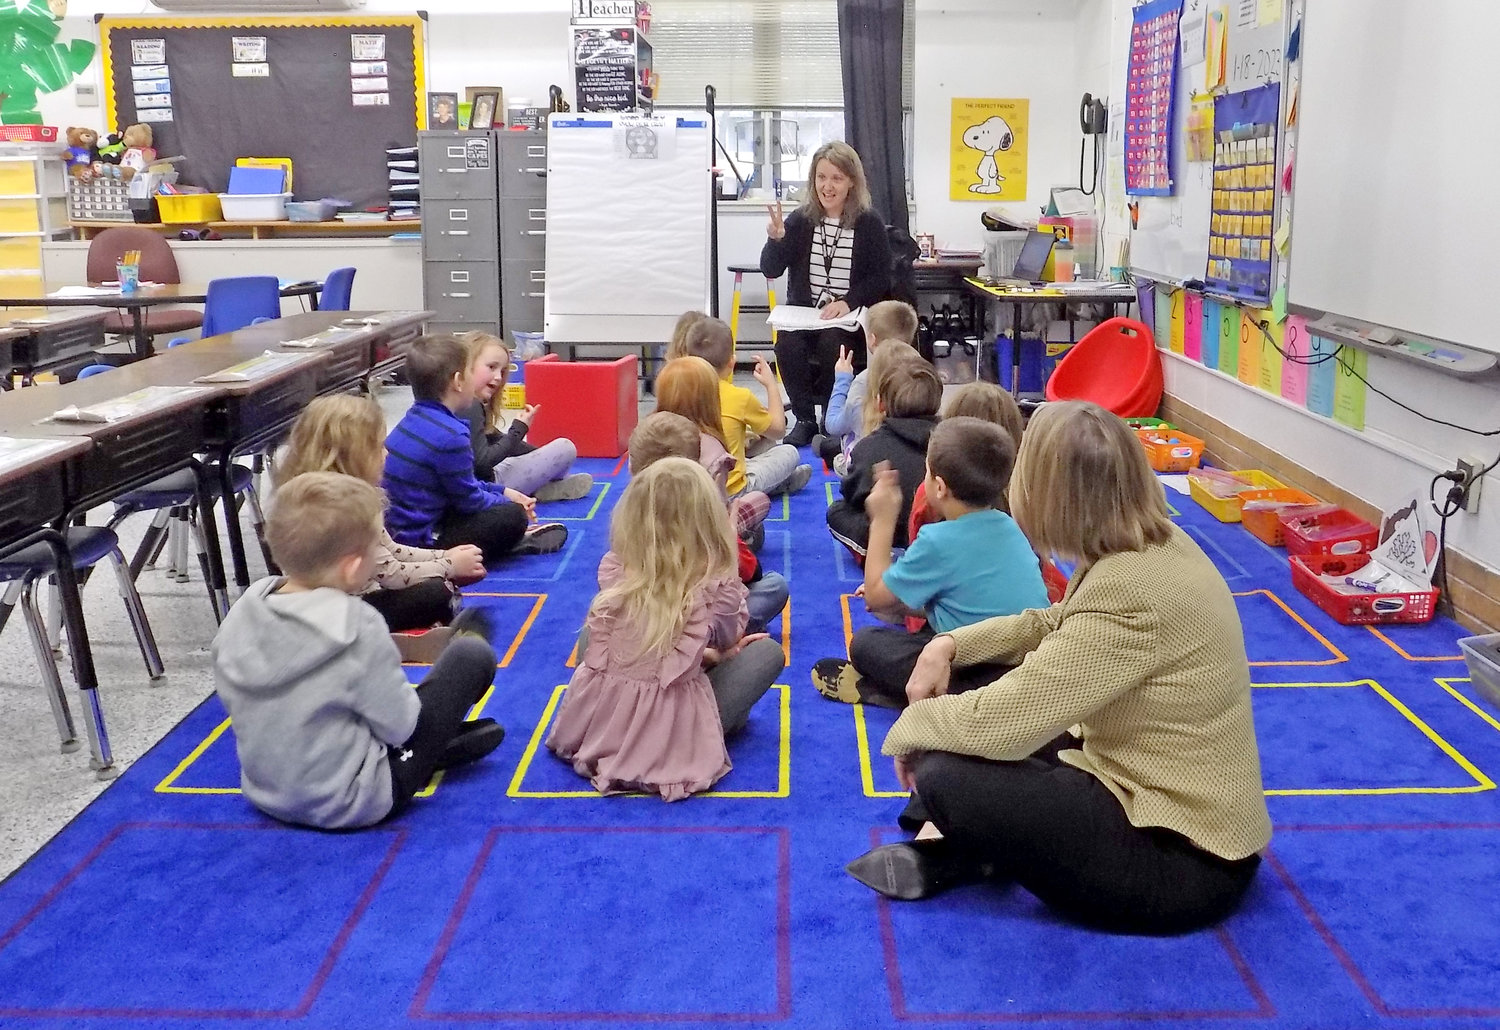 Rep. Miller-Meeks greeted every classroom on her tour of Lone Tree School; here, she learns to sound out words with Donda Nebergall’s kindergarten class.